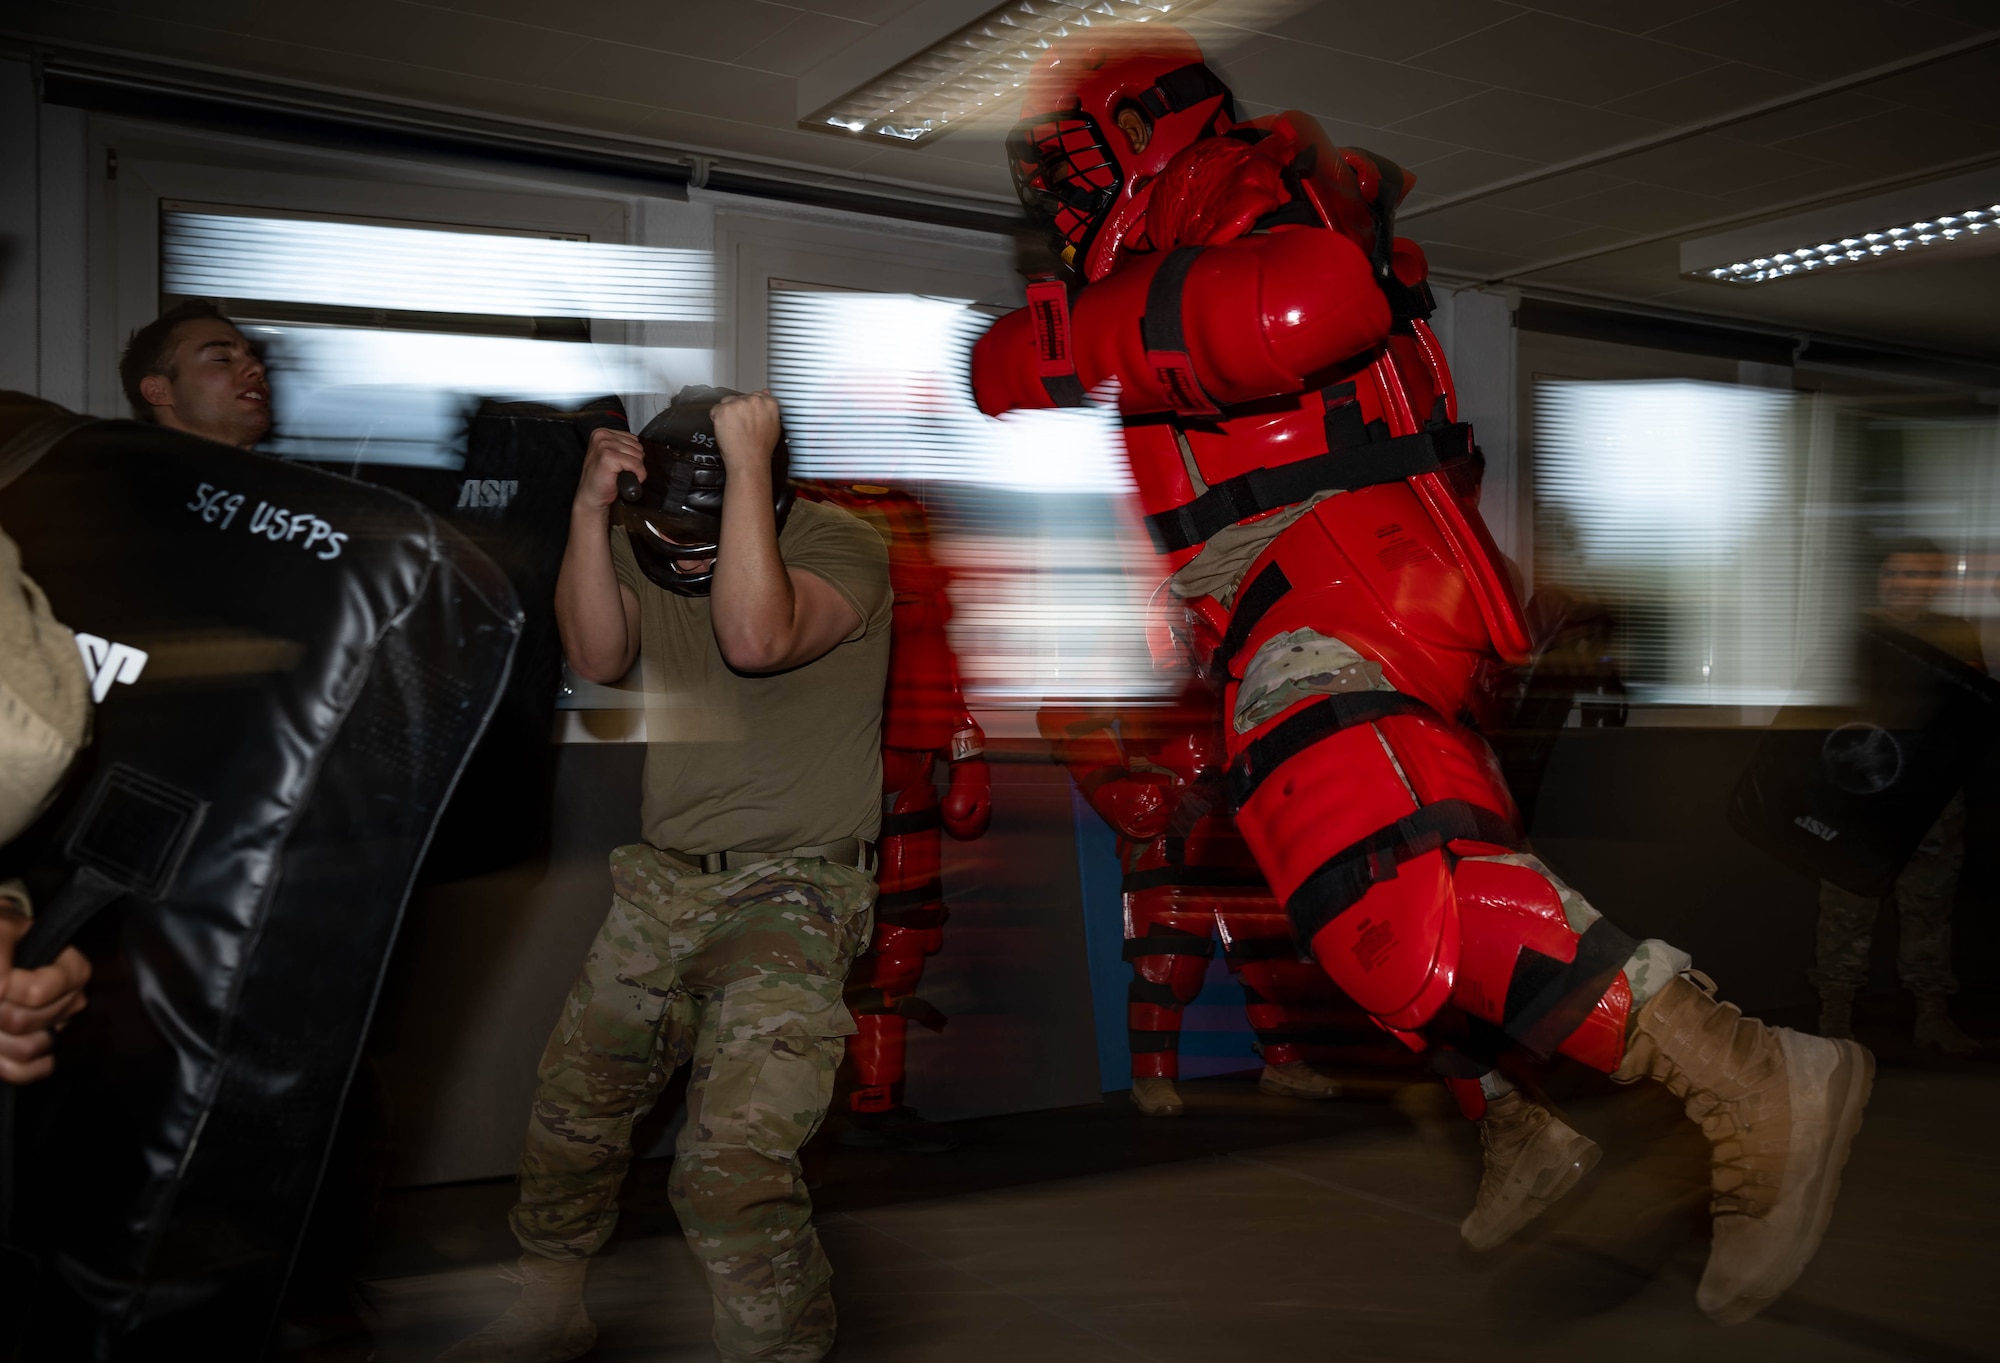 Airmen assigned to the 569th United States Forces Police Squadron, undergo Red Man training at Vogelweh Air Station, Germany, Dec. 6, 2021. Red Man training serves to prepare Airmen for a real-life physical altercation with a violent individual and build their confidence so that they respond to such a situation appropriately. (U.S. Air Force photo by Airman Jared Lovett)